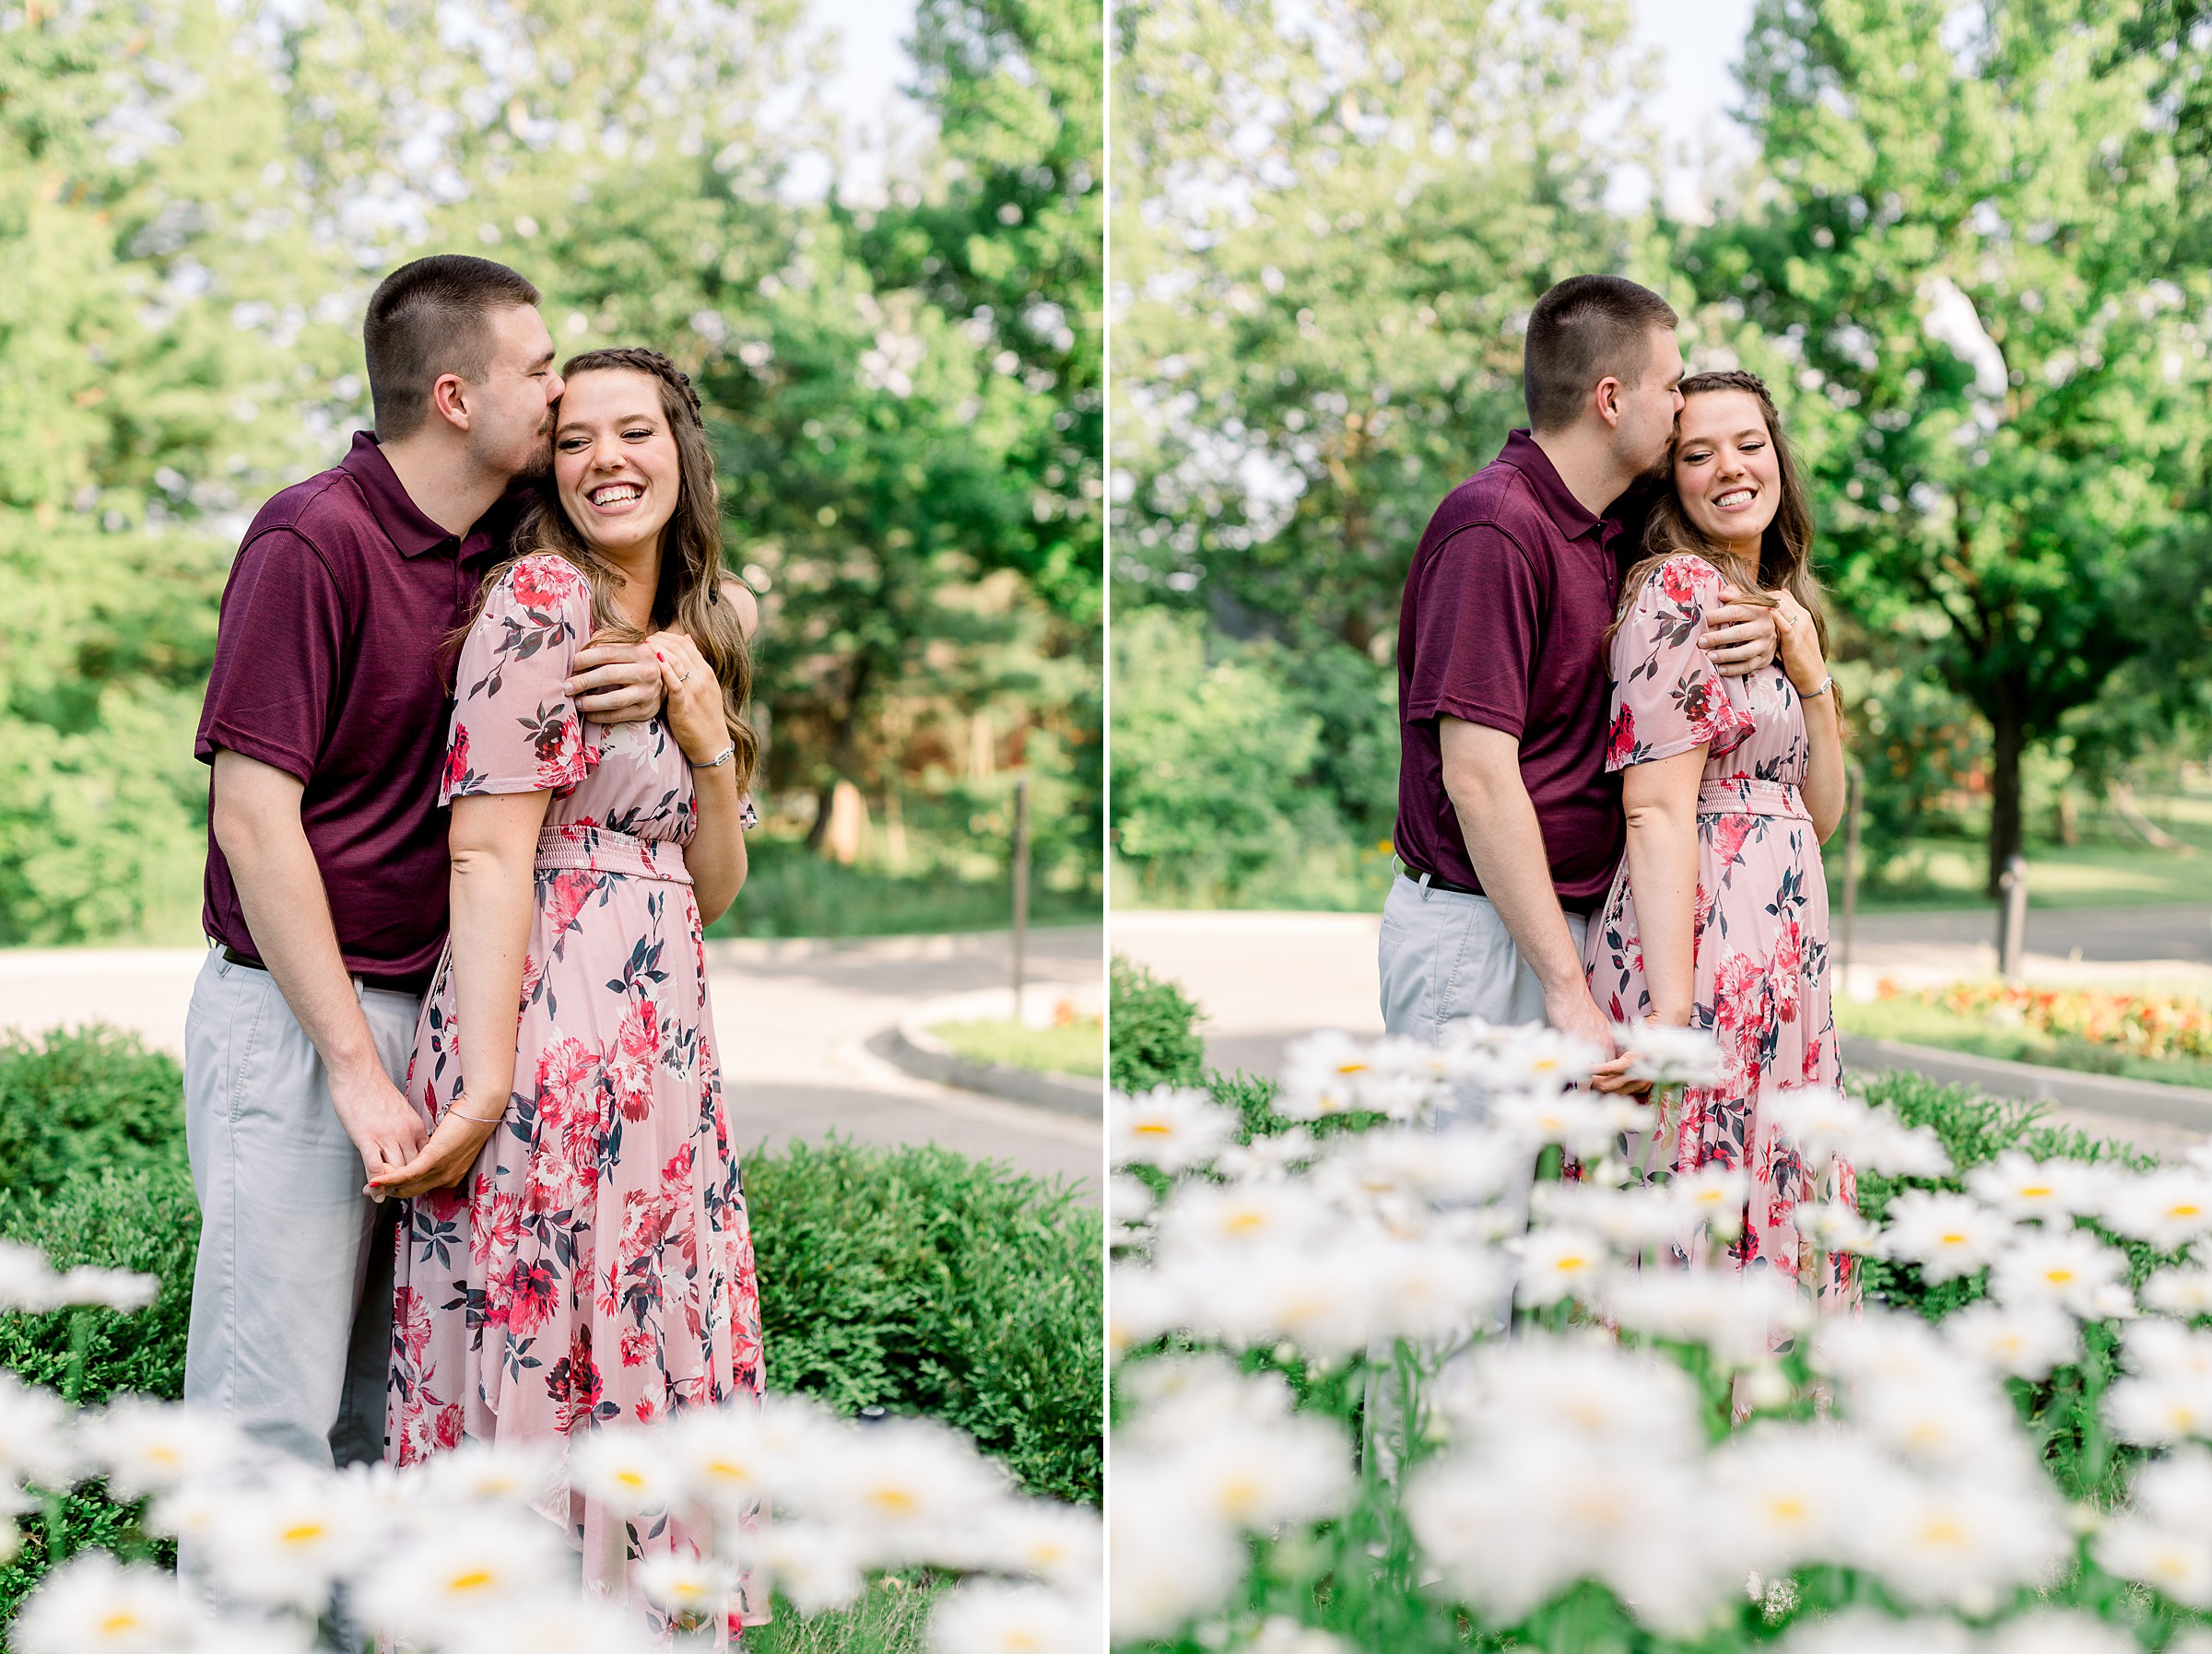 Engagement pictures at Coxhall Gardens in Carmel Indiana. Couple posing behind flowers for photos. 